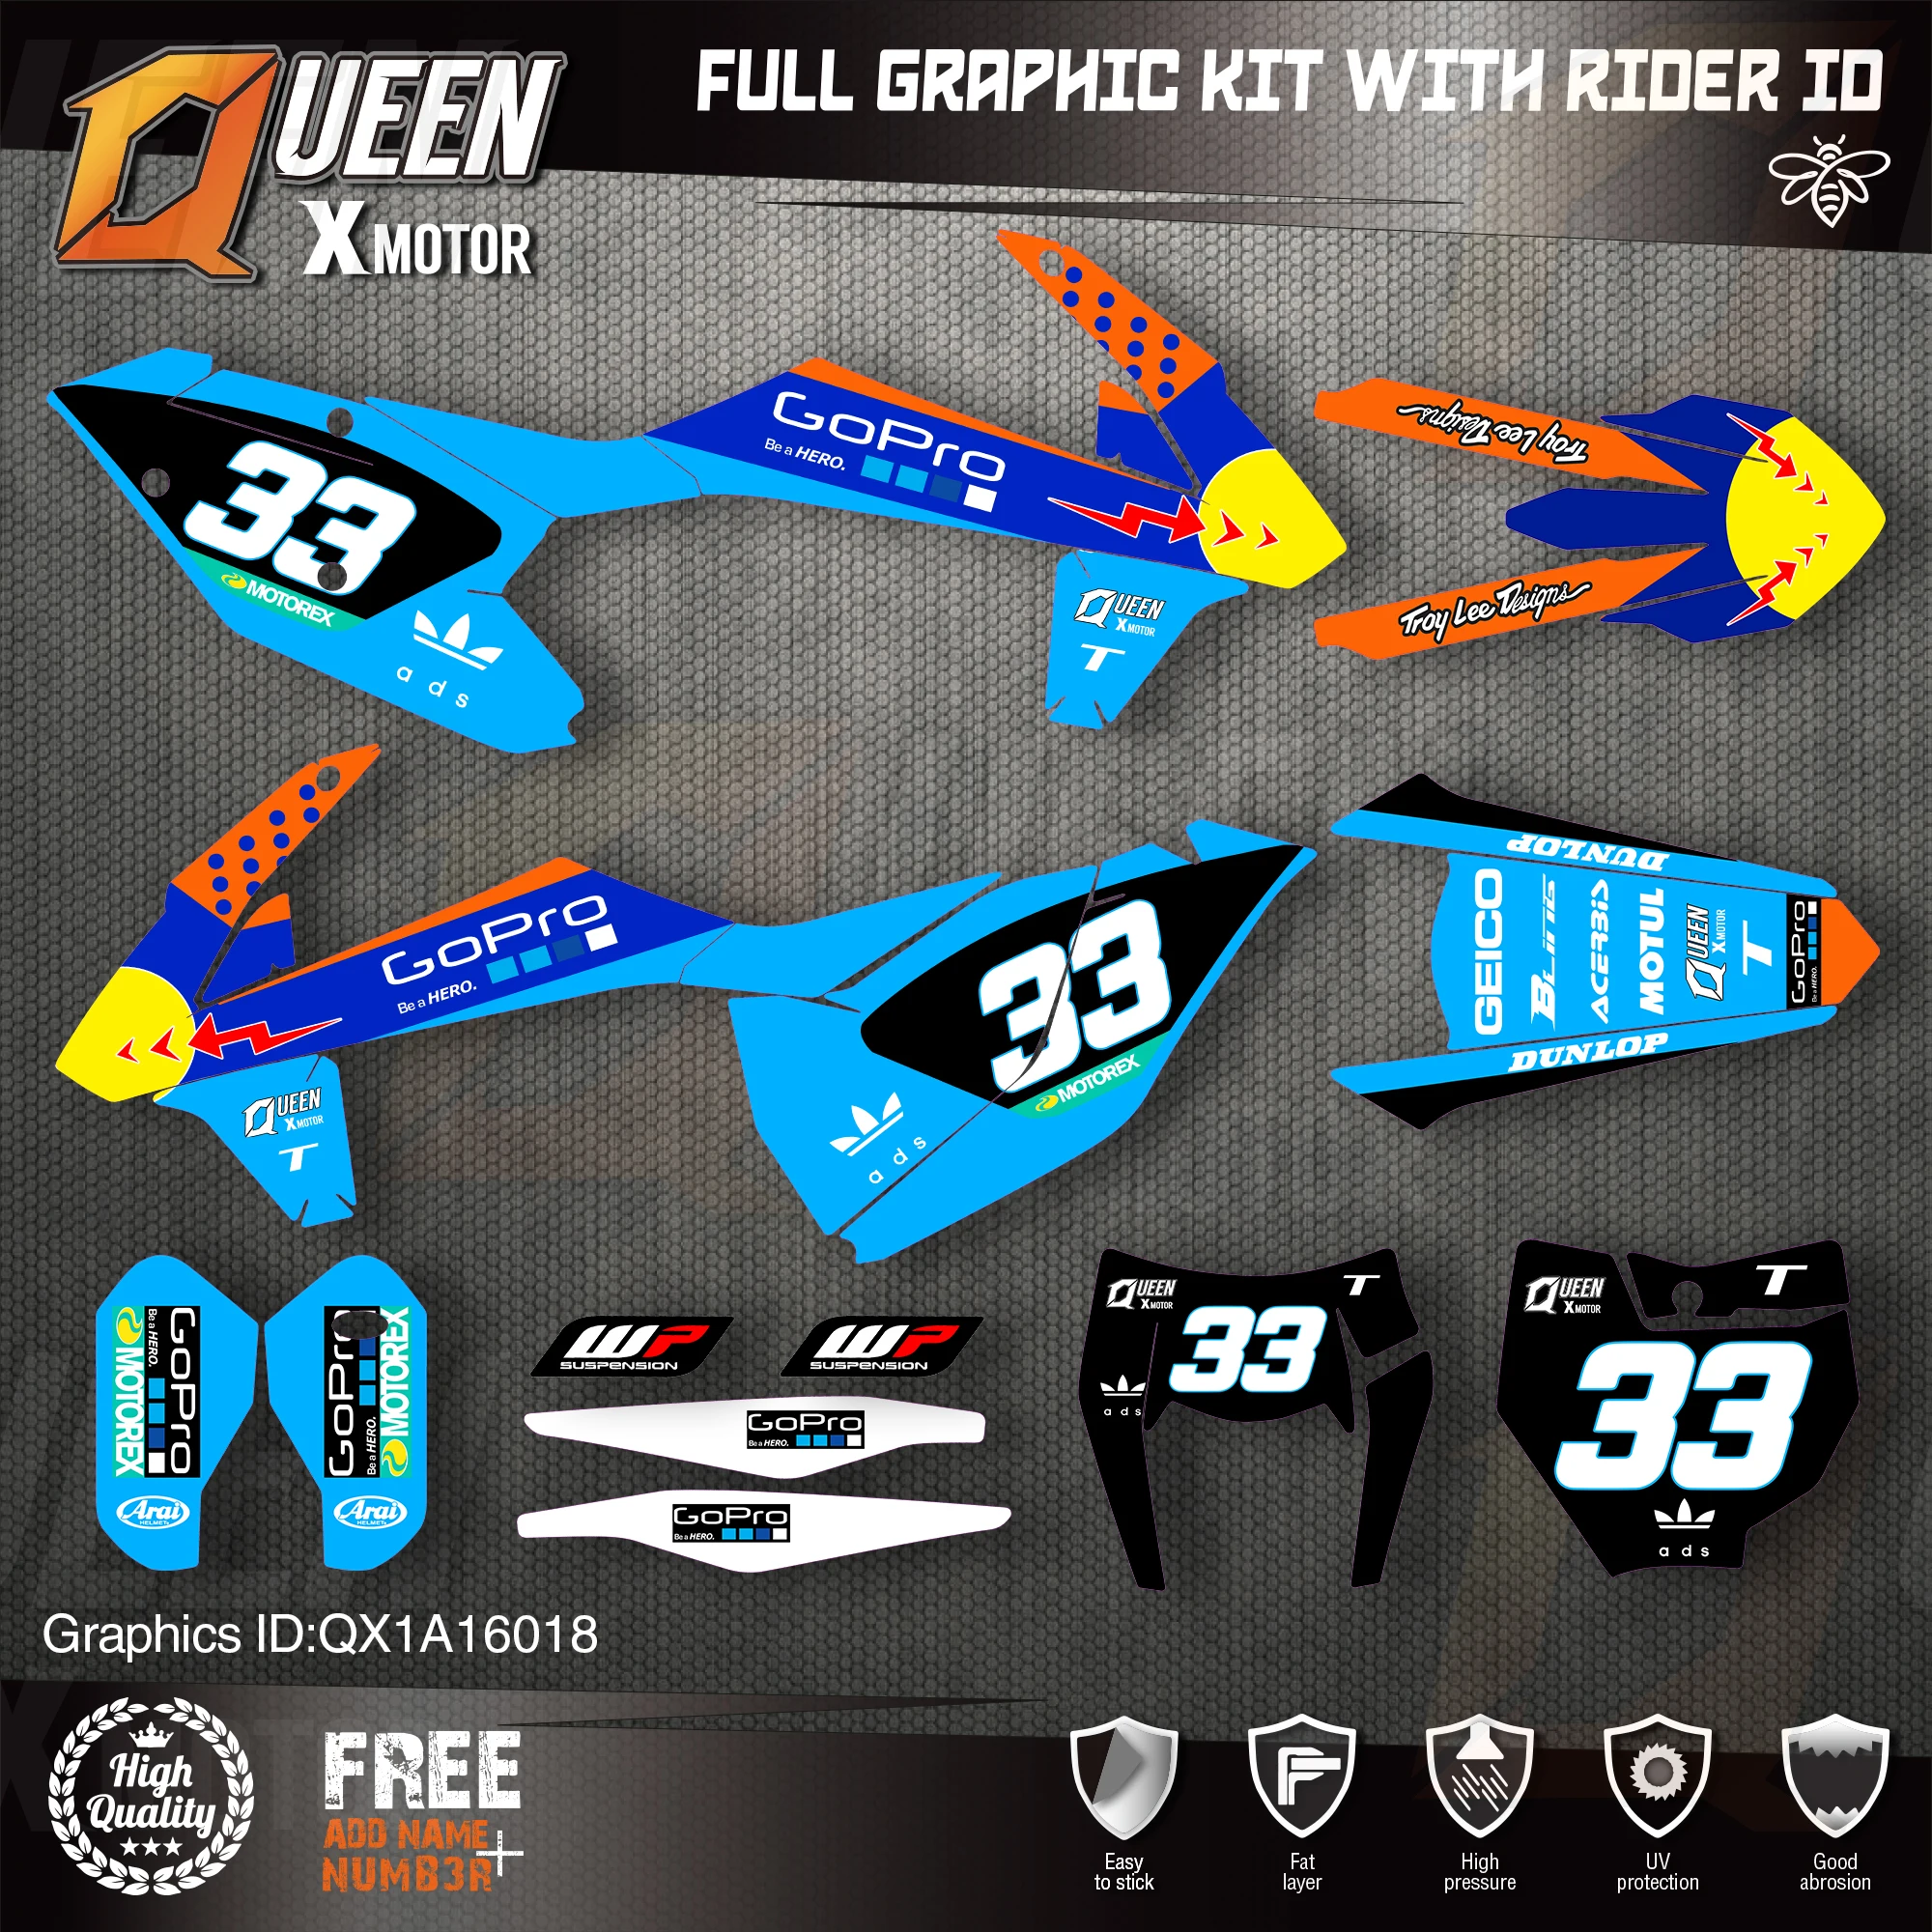 

QUEEN X MOTOR Custom Team Graphics Decals Stickers Kit For KTM 2016 2017 2018 SX SXF , 2017 2018 2019 EXC XC-W EXC-F 018